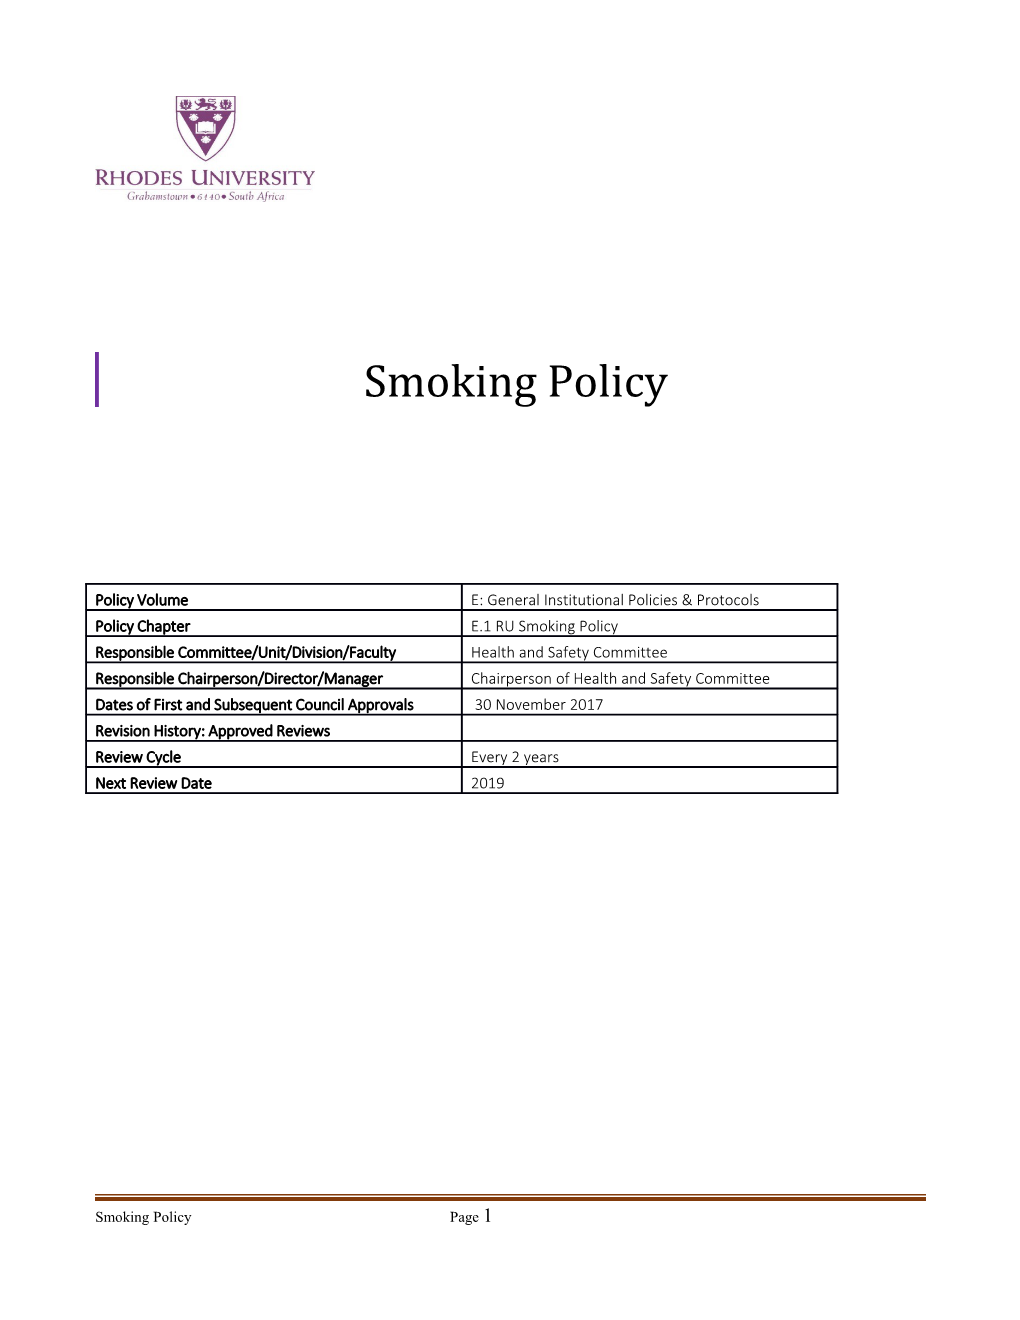 Policy Particulars